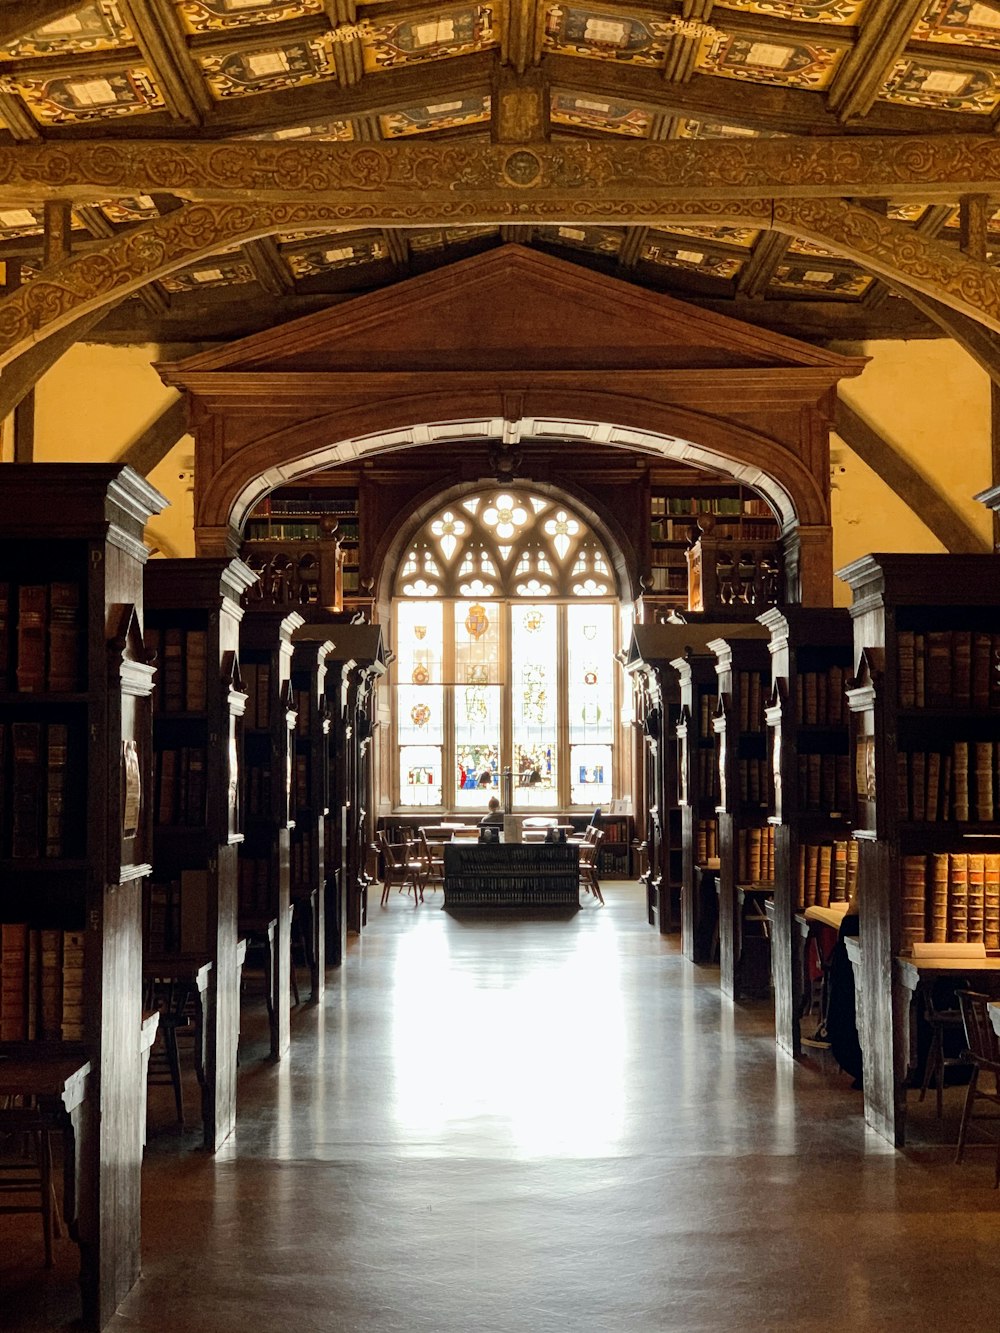 Harry Potter Filming Location 5: Duke Humfrey's Library, Oxford